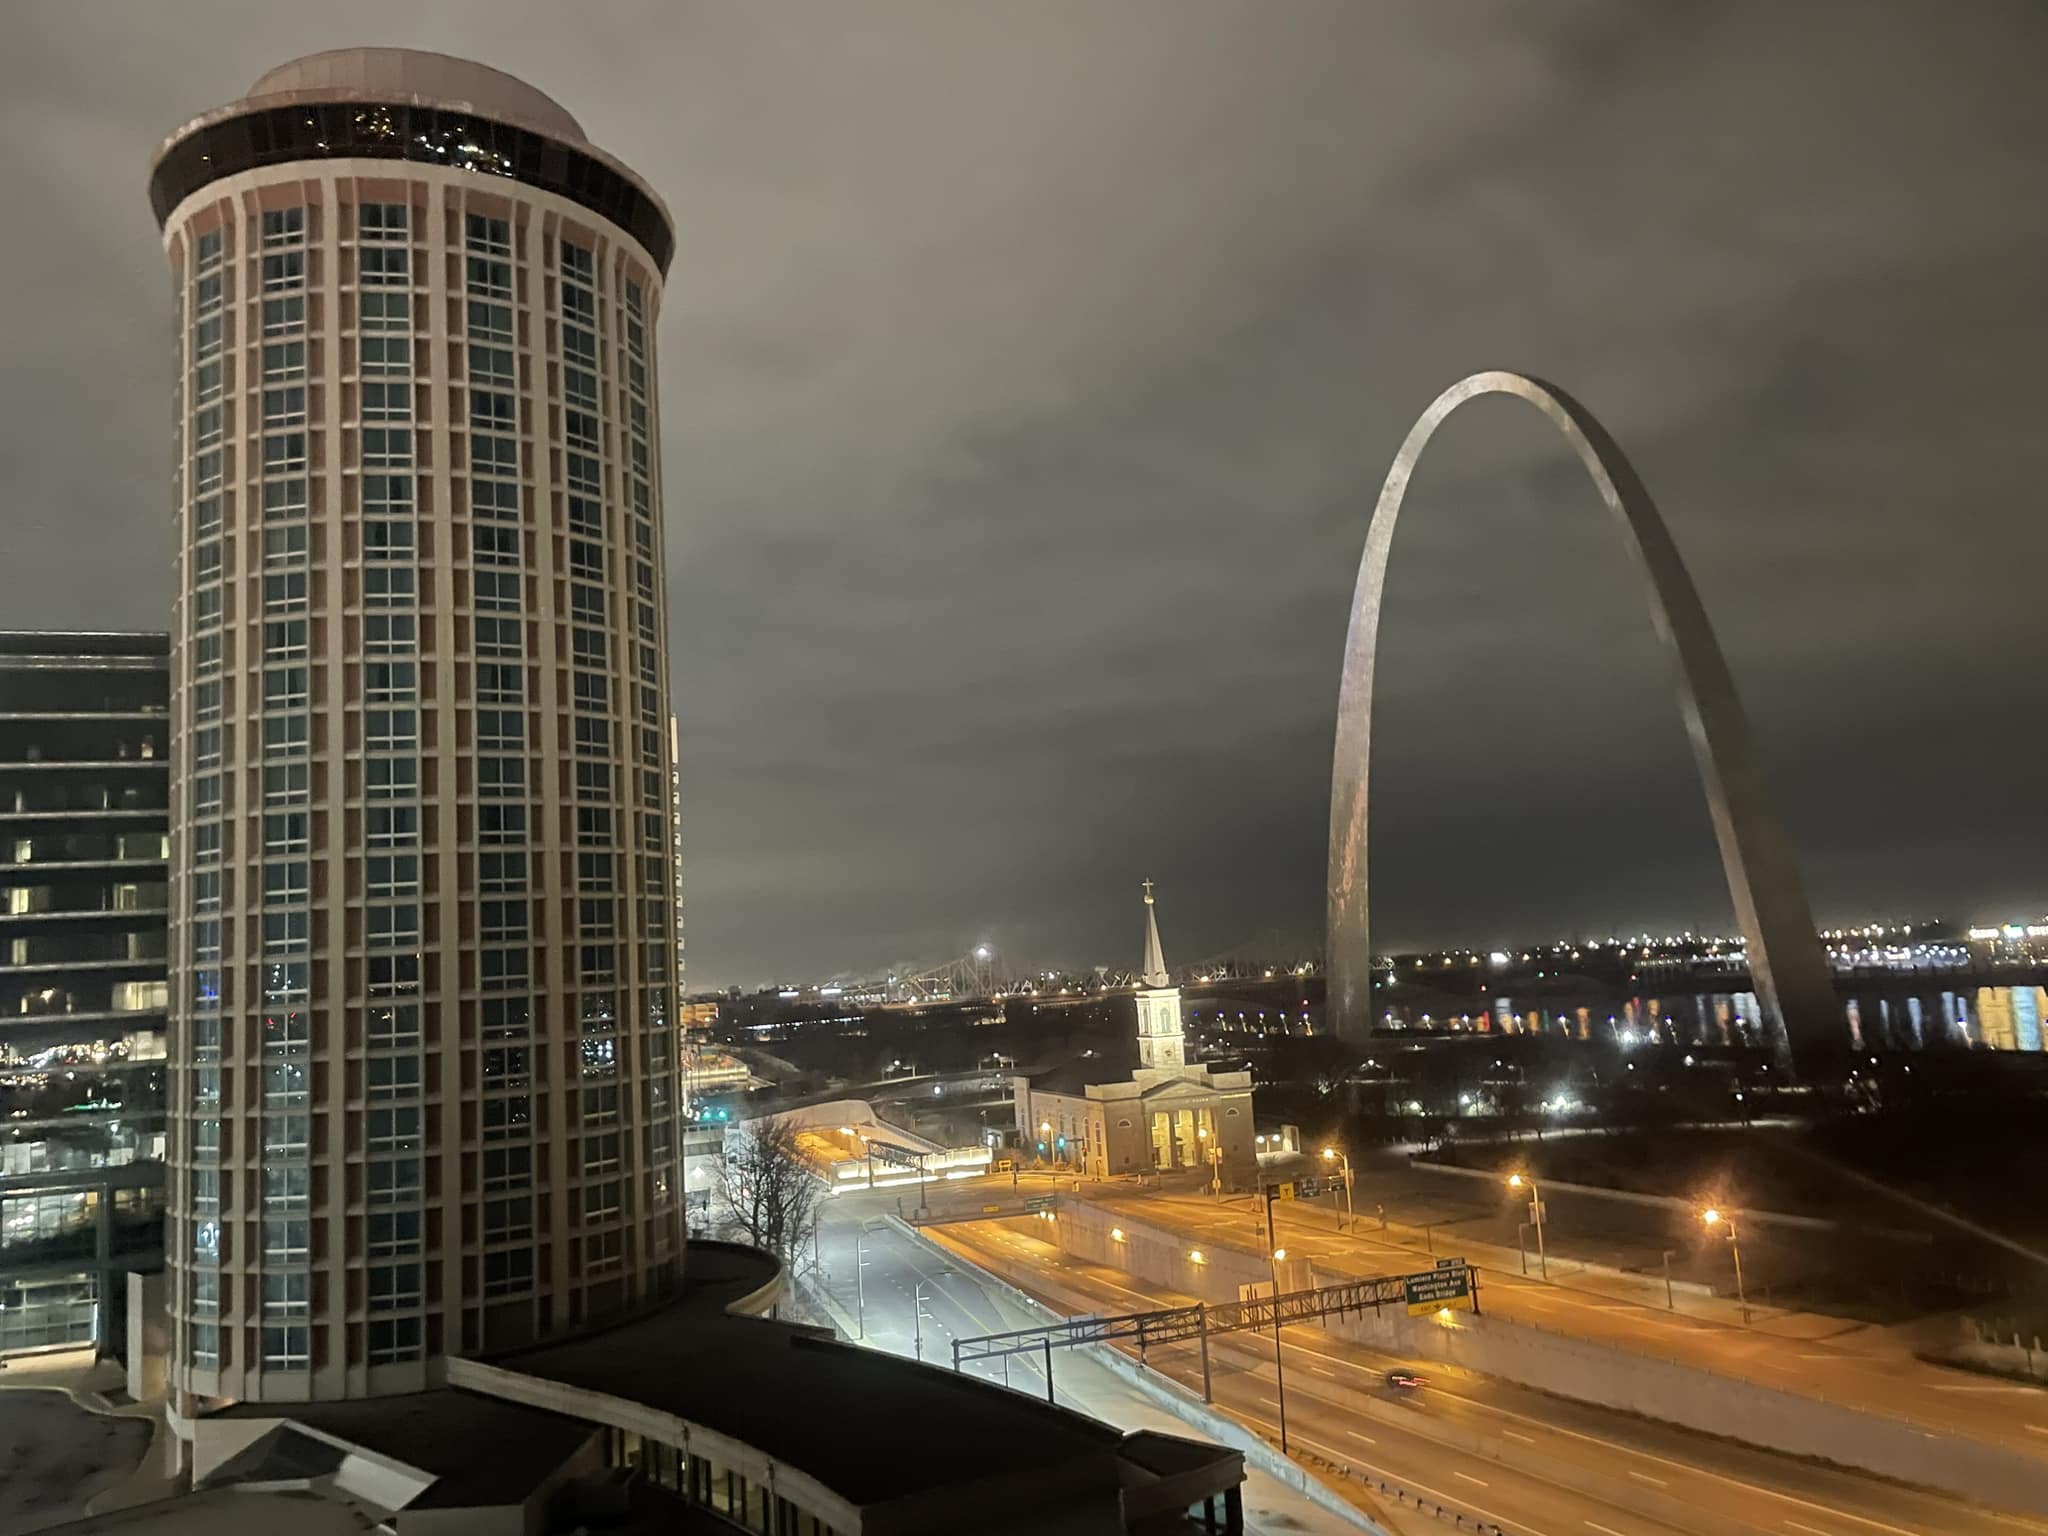 See inside: Abandoned Millennium Hotel in St. Louis